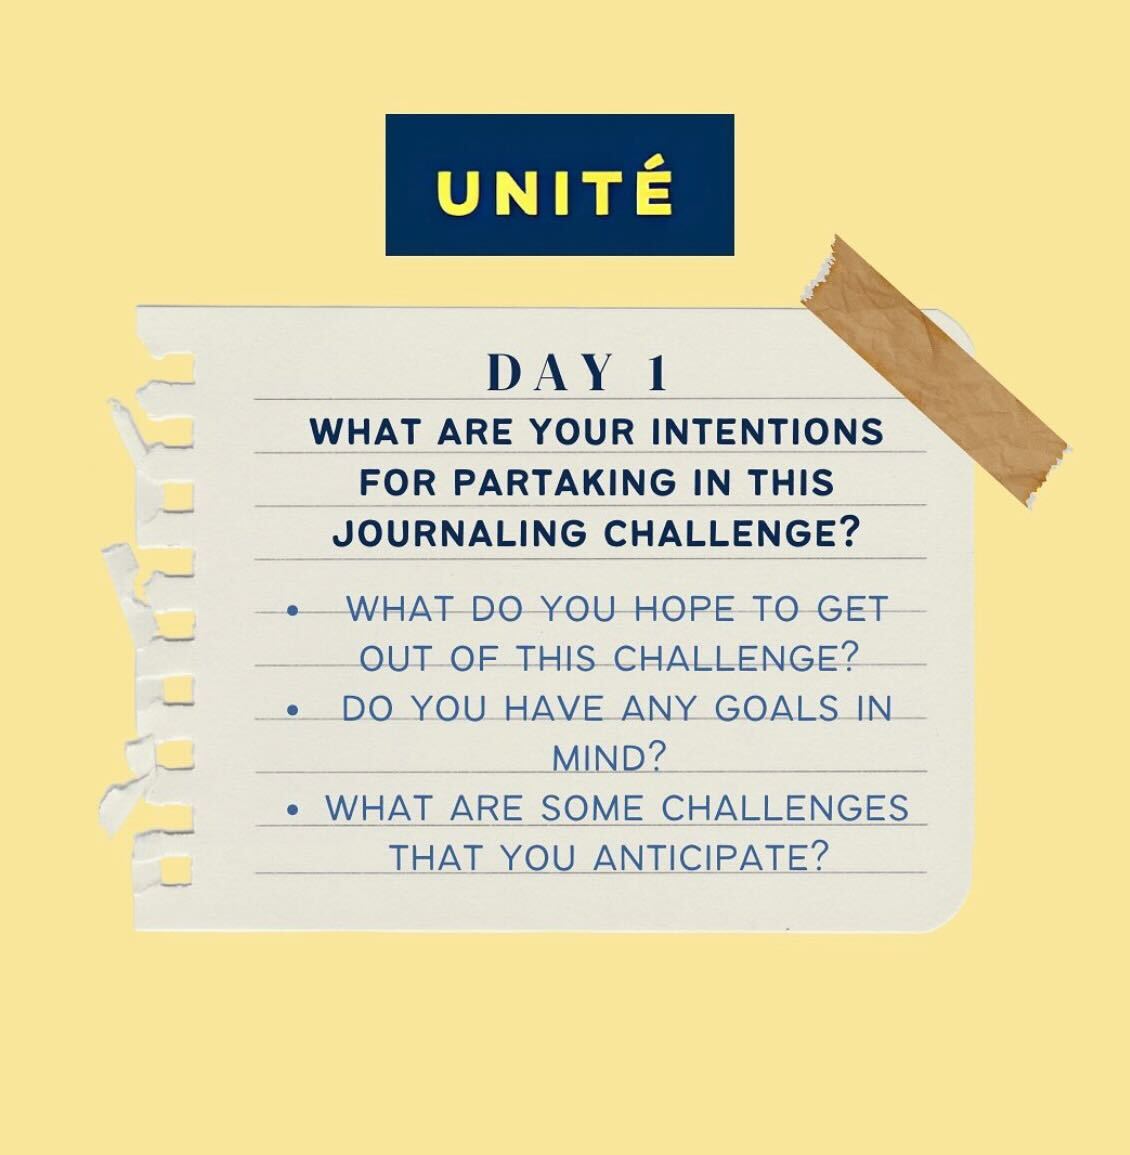 Day 1 of the July Journaling Challenge from Unité, a mental health initiative by and for Gen Z.